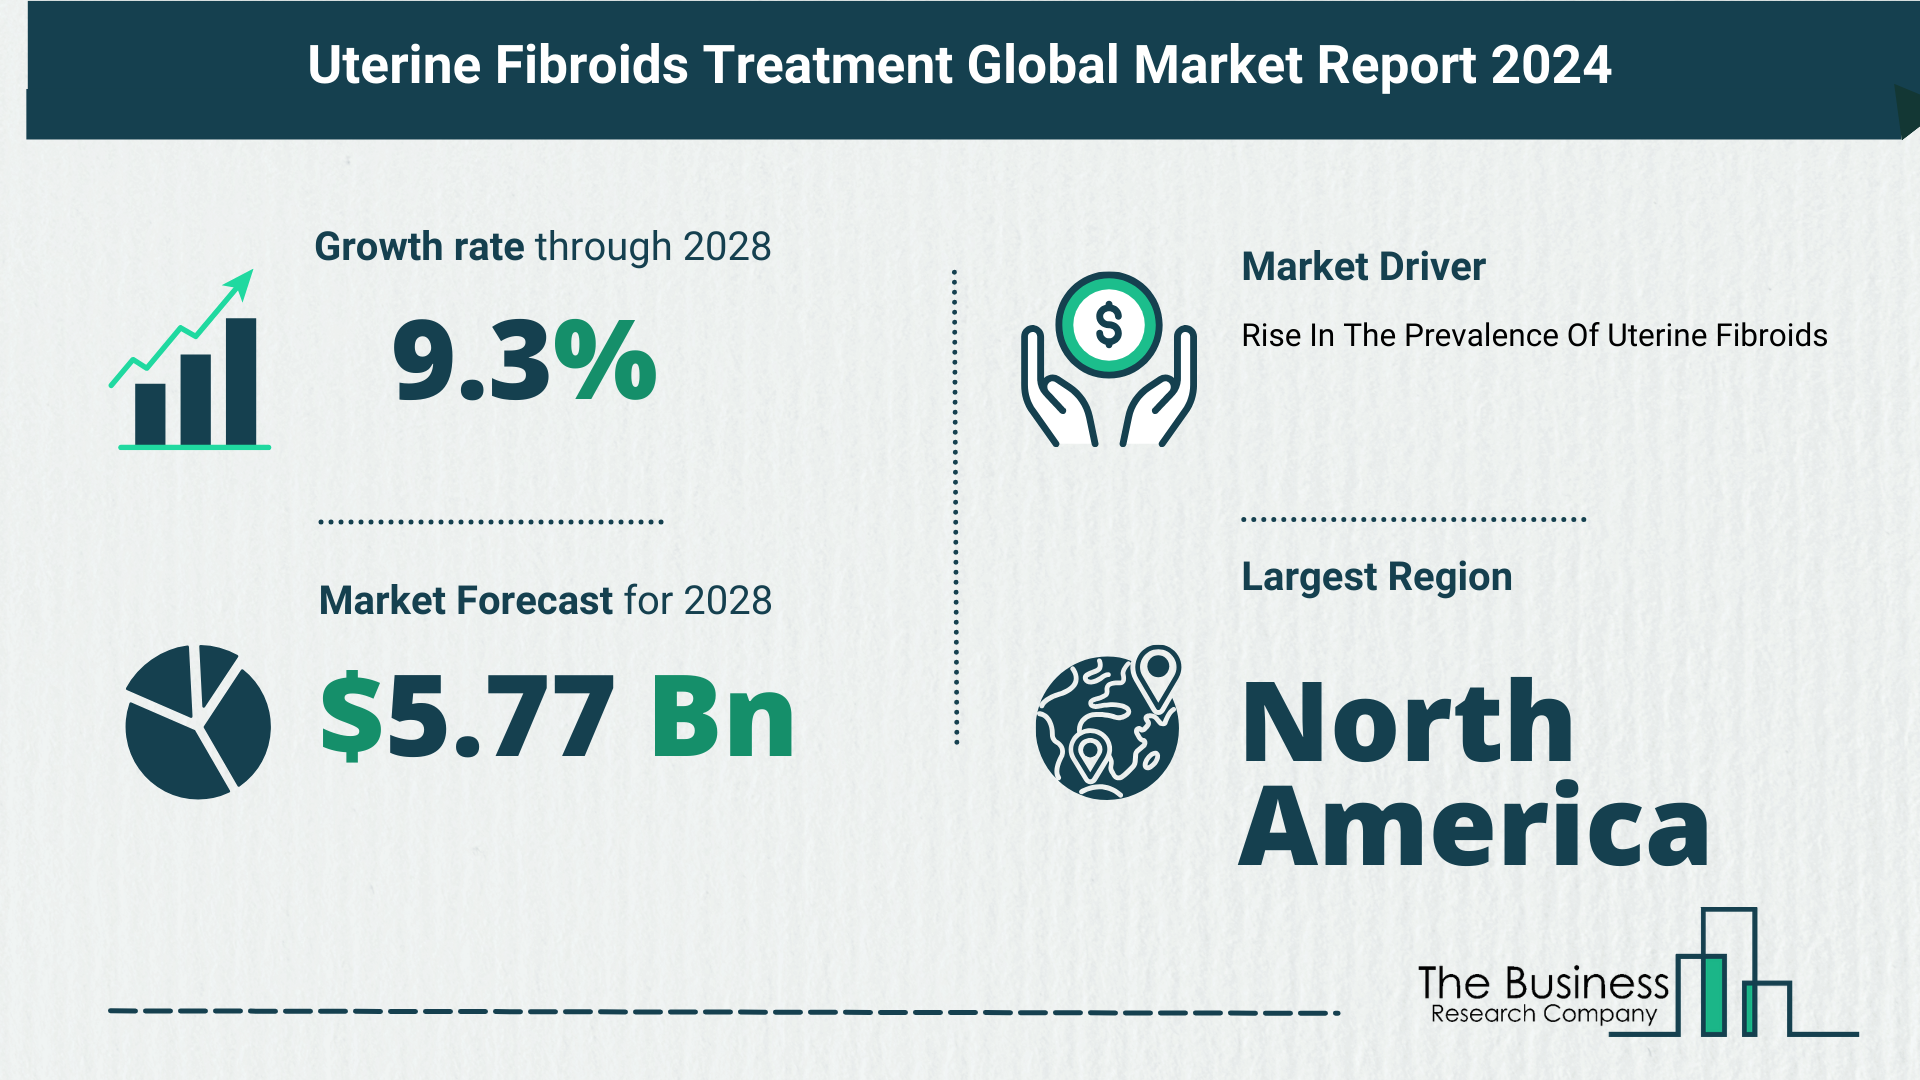 Uterine Fibroids Treatment Market Forecast Until 2033 – Estimated Market Size And Growth Rate